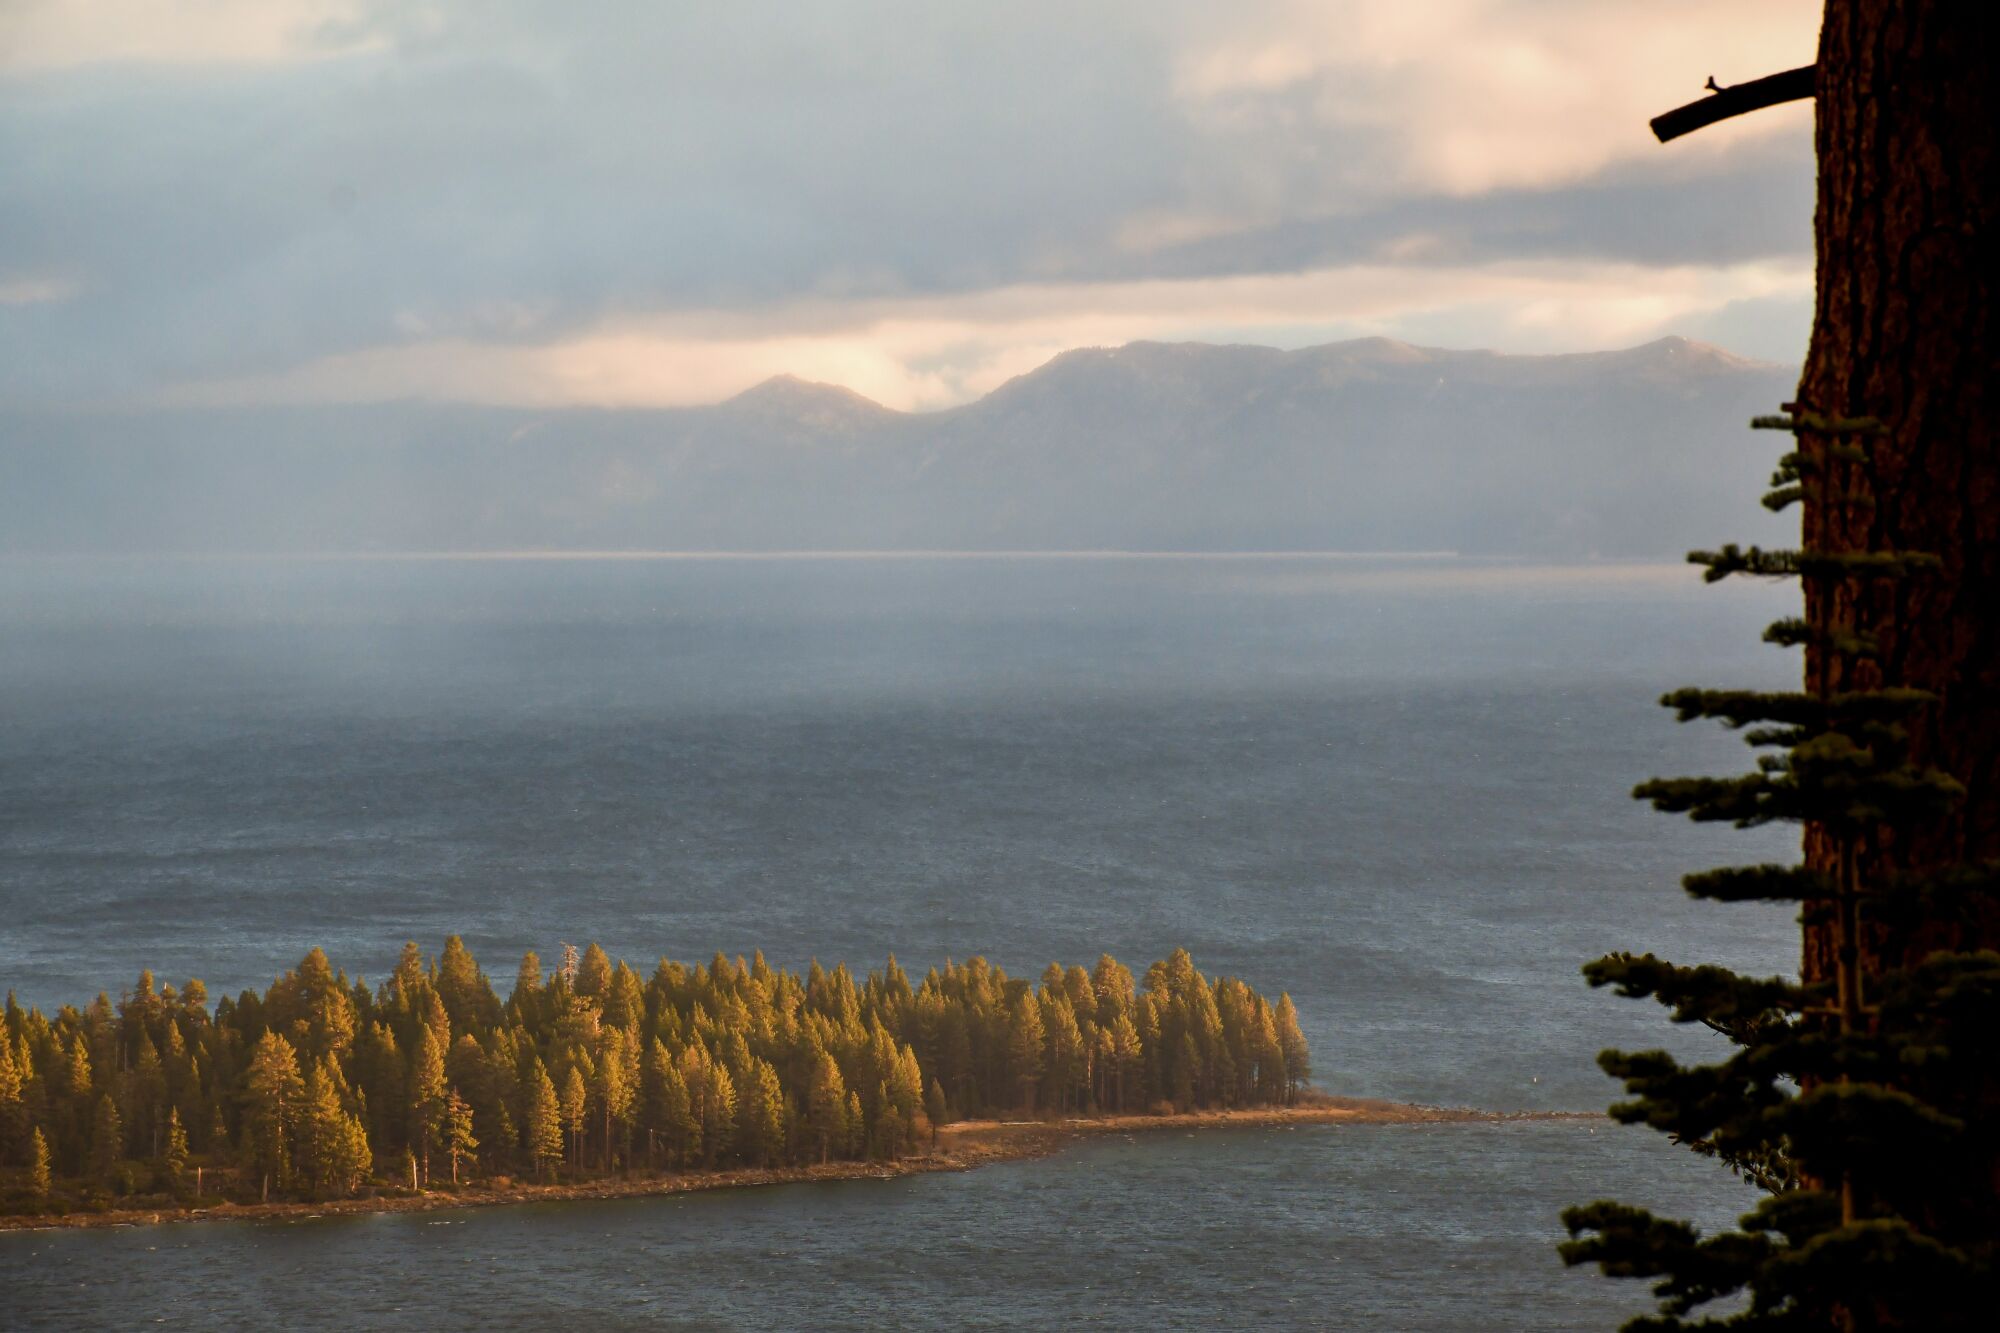 Sunrise over Lake Tahoe's Emerald Bay sometimes comes with billowing clouds and rainbows.